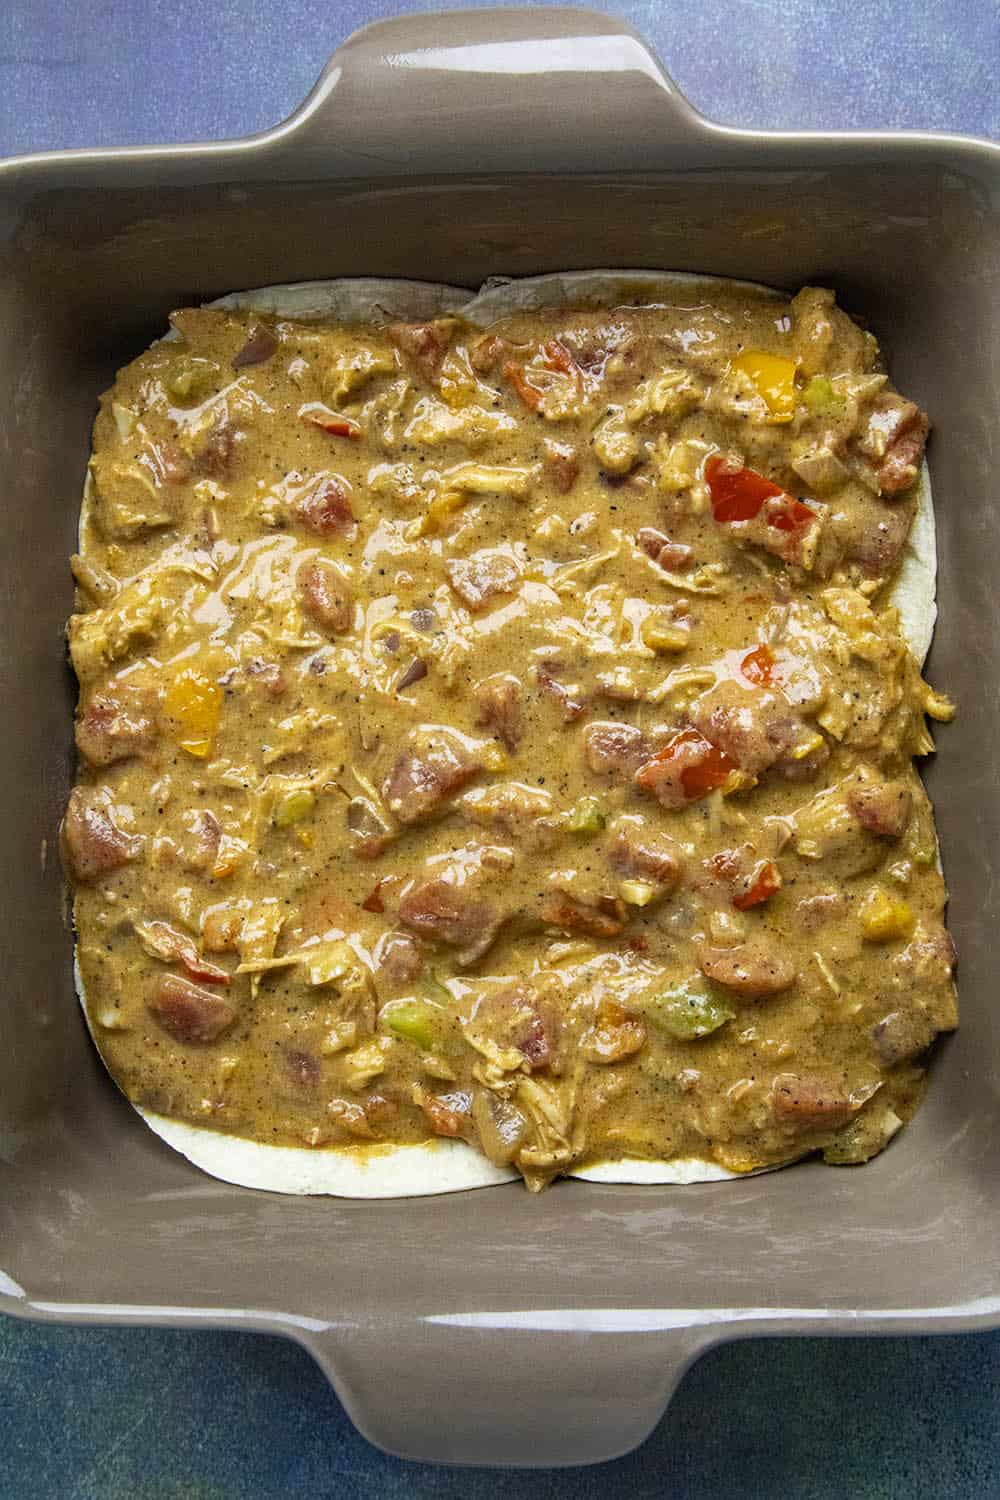 Layering in the filling of the King Ranch Casserole